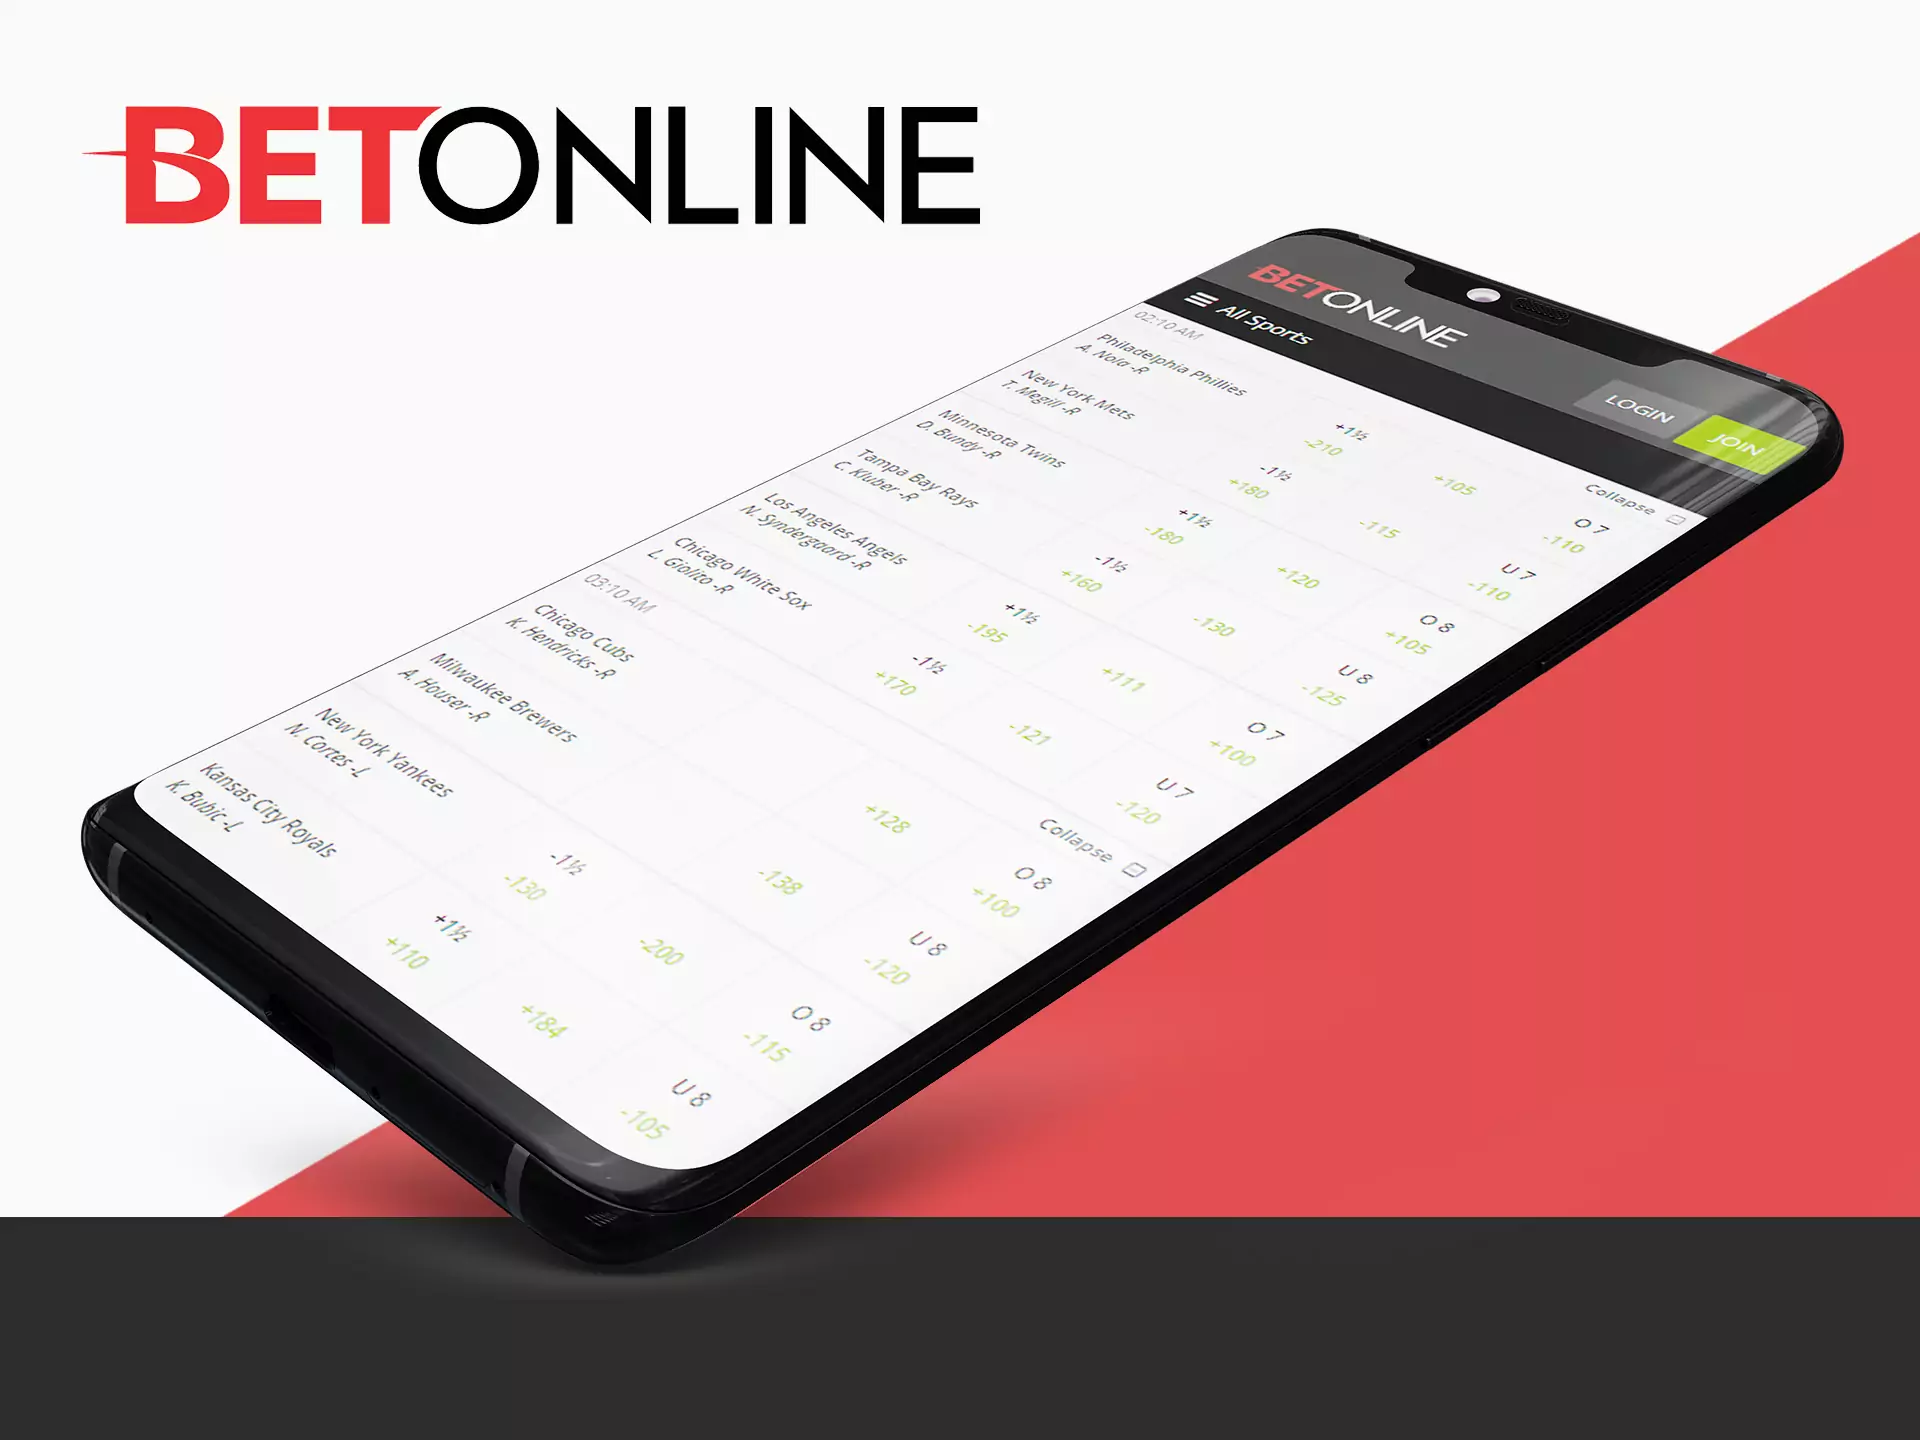 The Betonline app allows you to make various types of bets on sports.